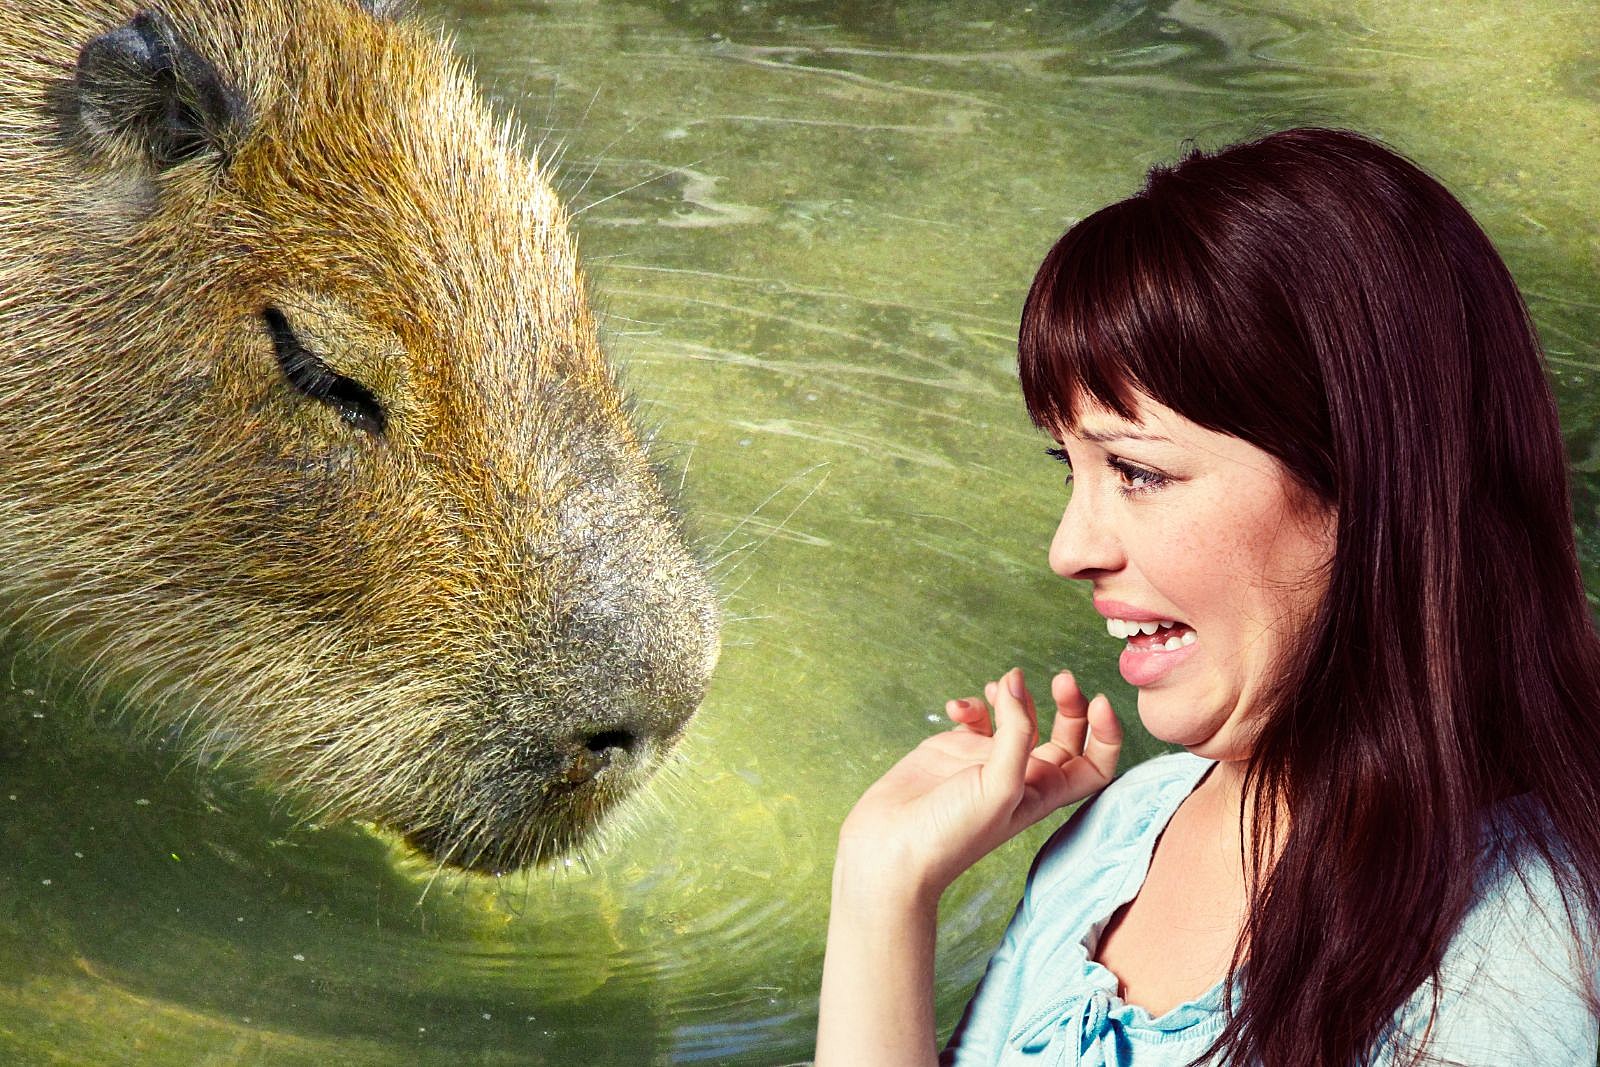 Capybara: the charming, largest rodent living in South America